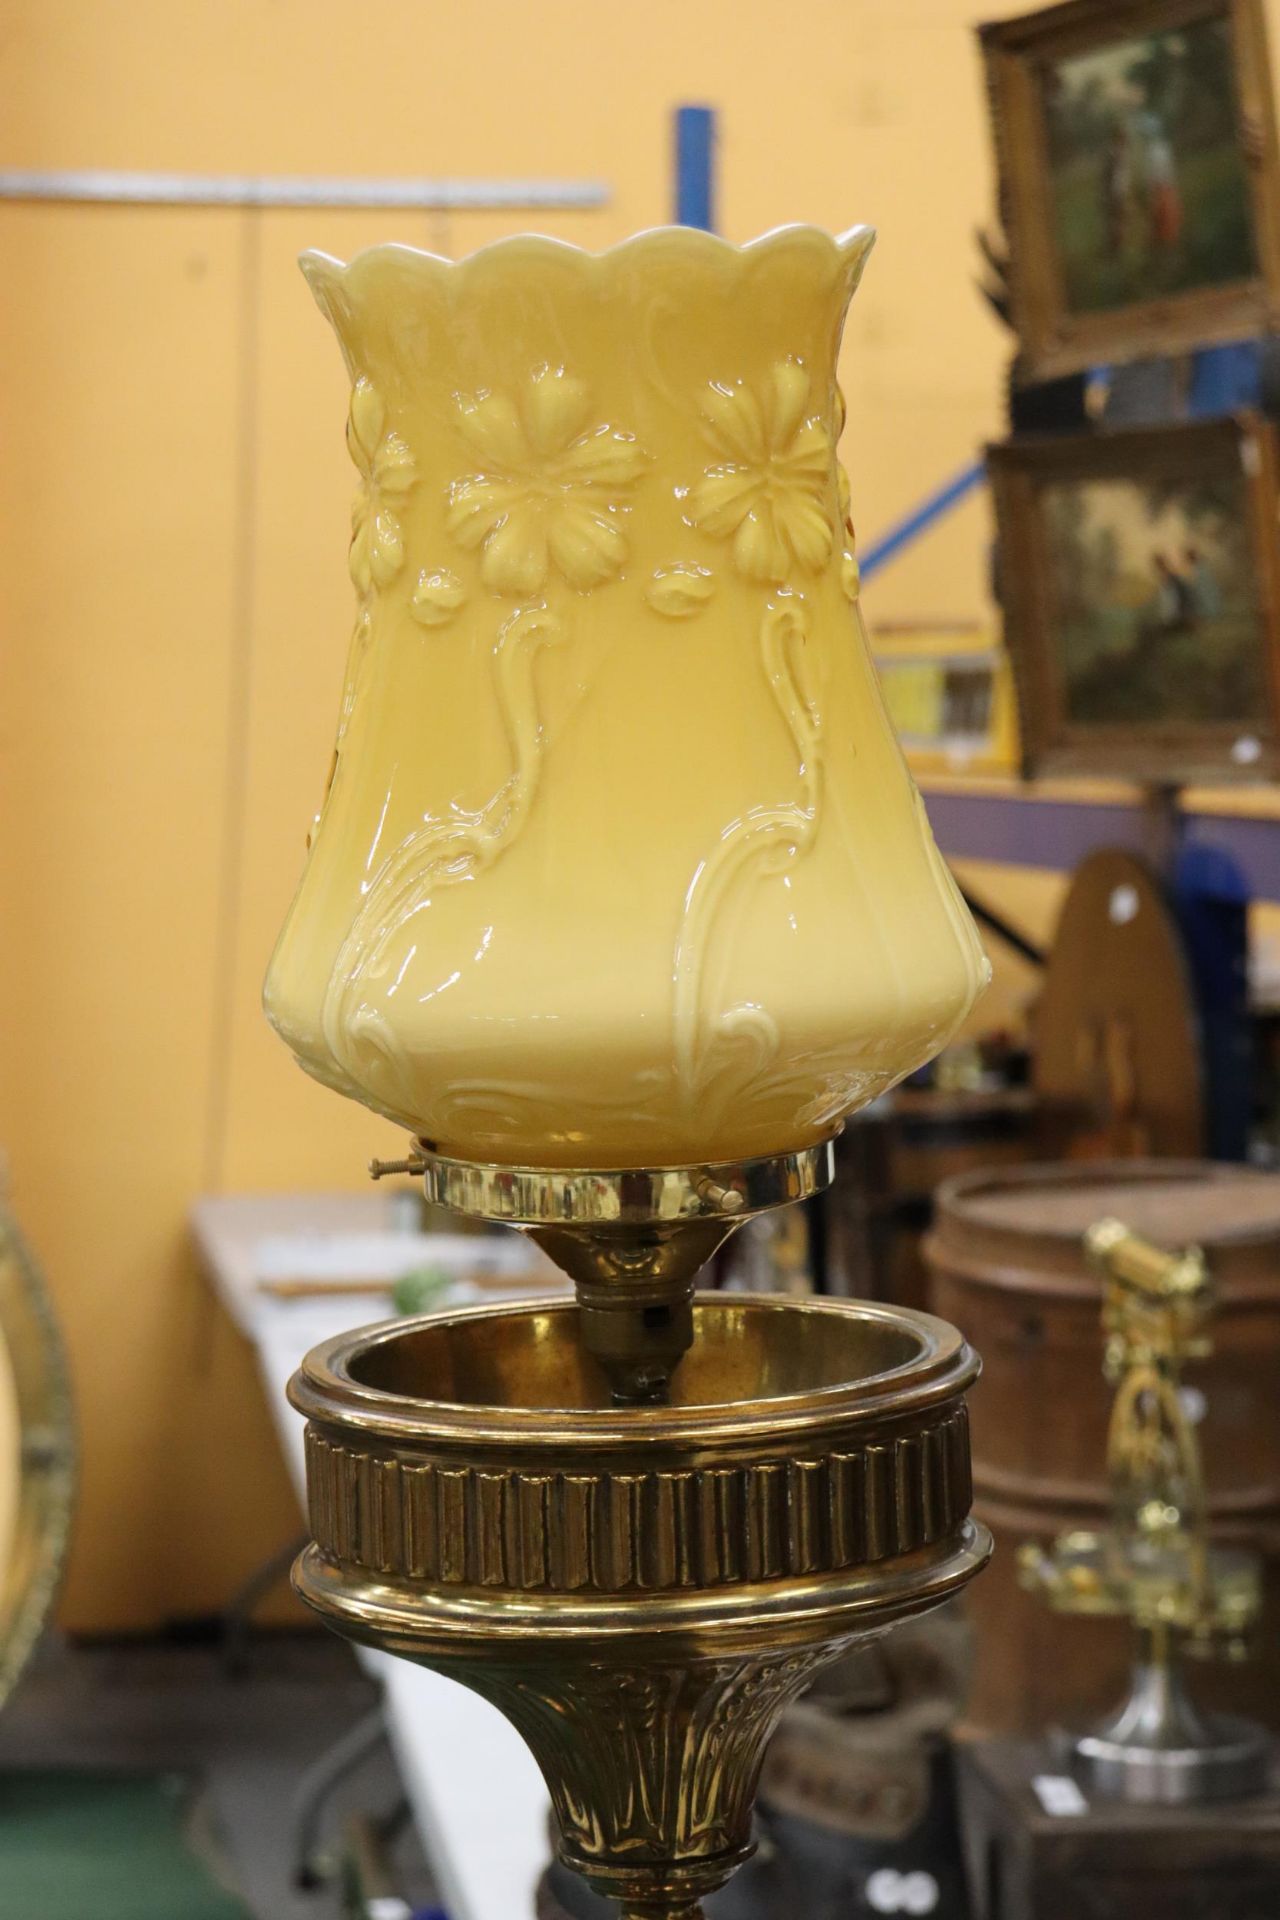 A FLOOR STANDING BRASS PUGIN STYLE CONVERTED CANDLESTICK WITH ORNAGE GLASS SHADE - Image 2 of 8